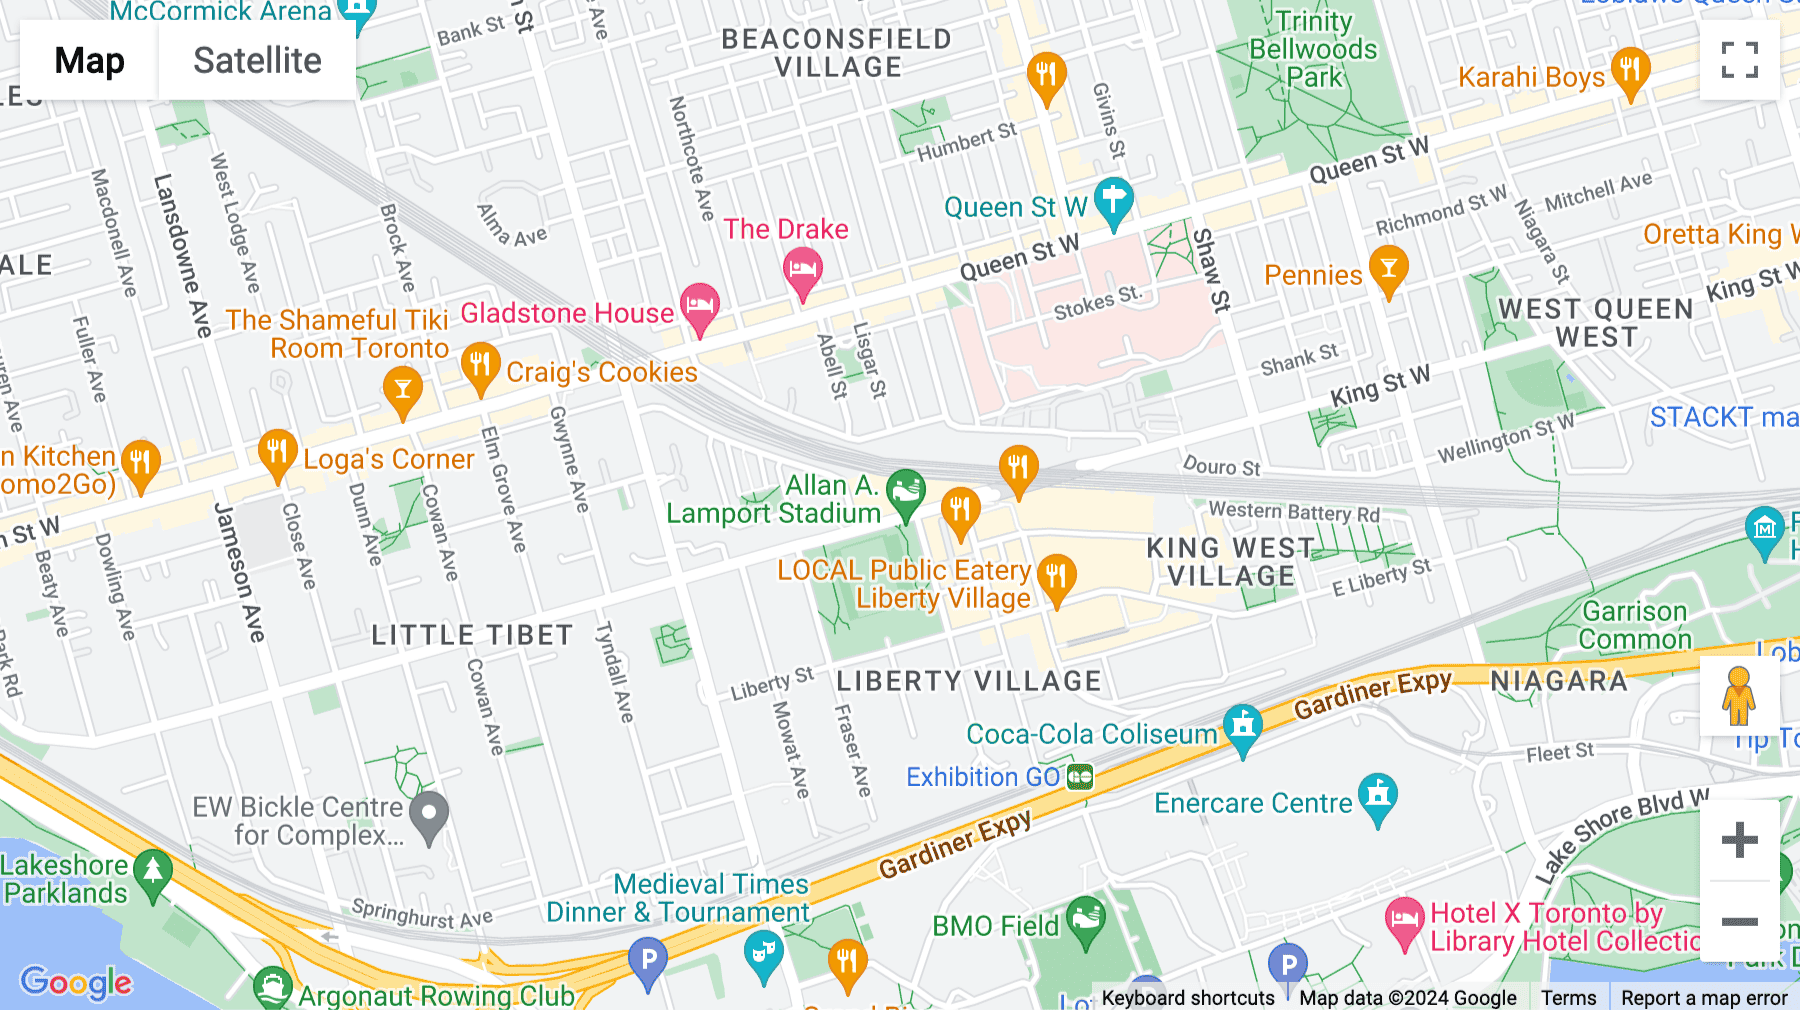 Click for interative map of 1100 King Street West, Toronto